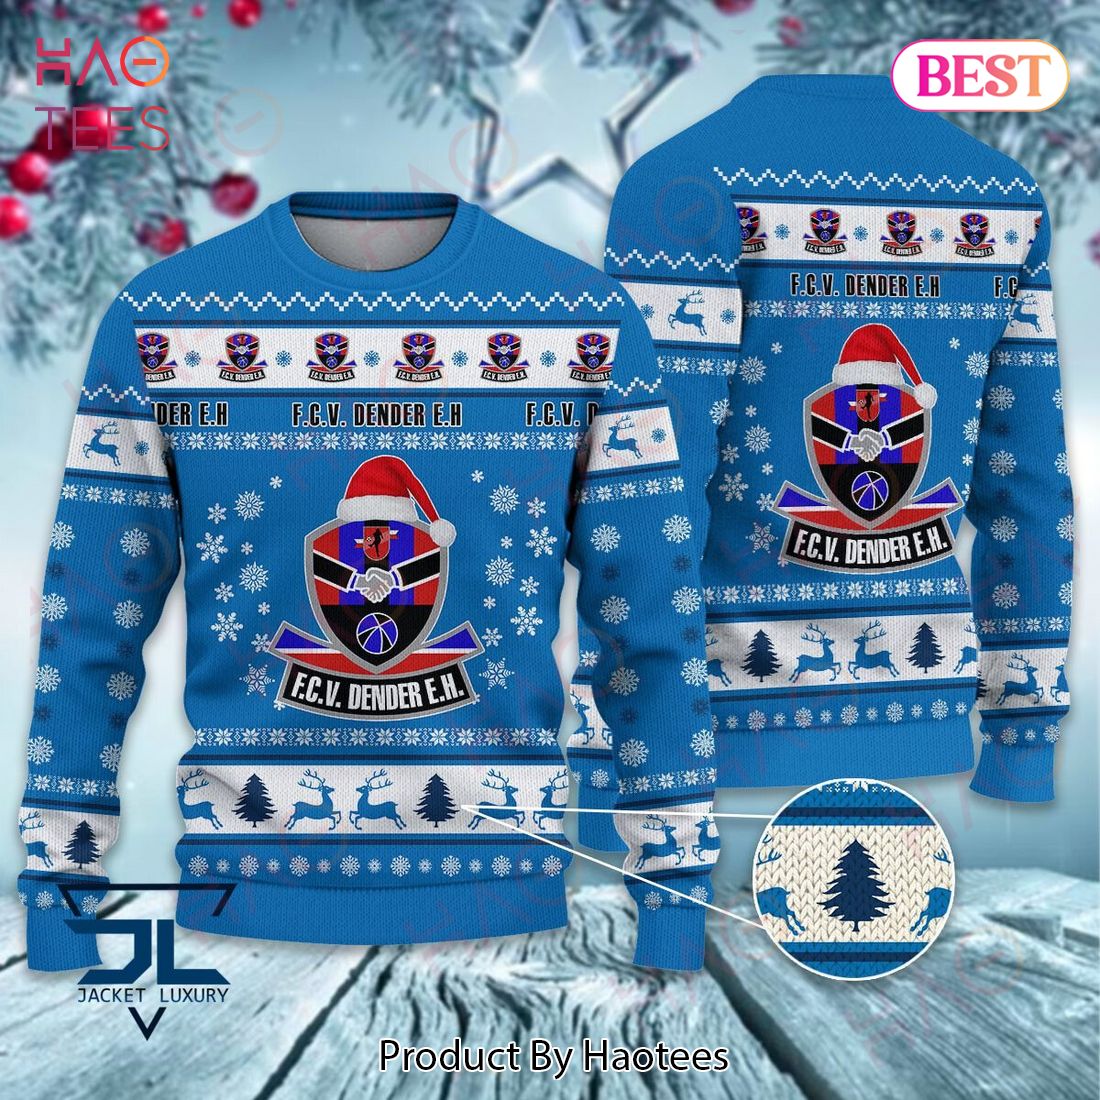 HOT F.C.V. Dender E.H Christmas Luxury Brand Sweater Limited Edition